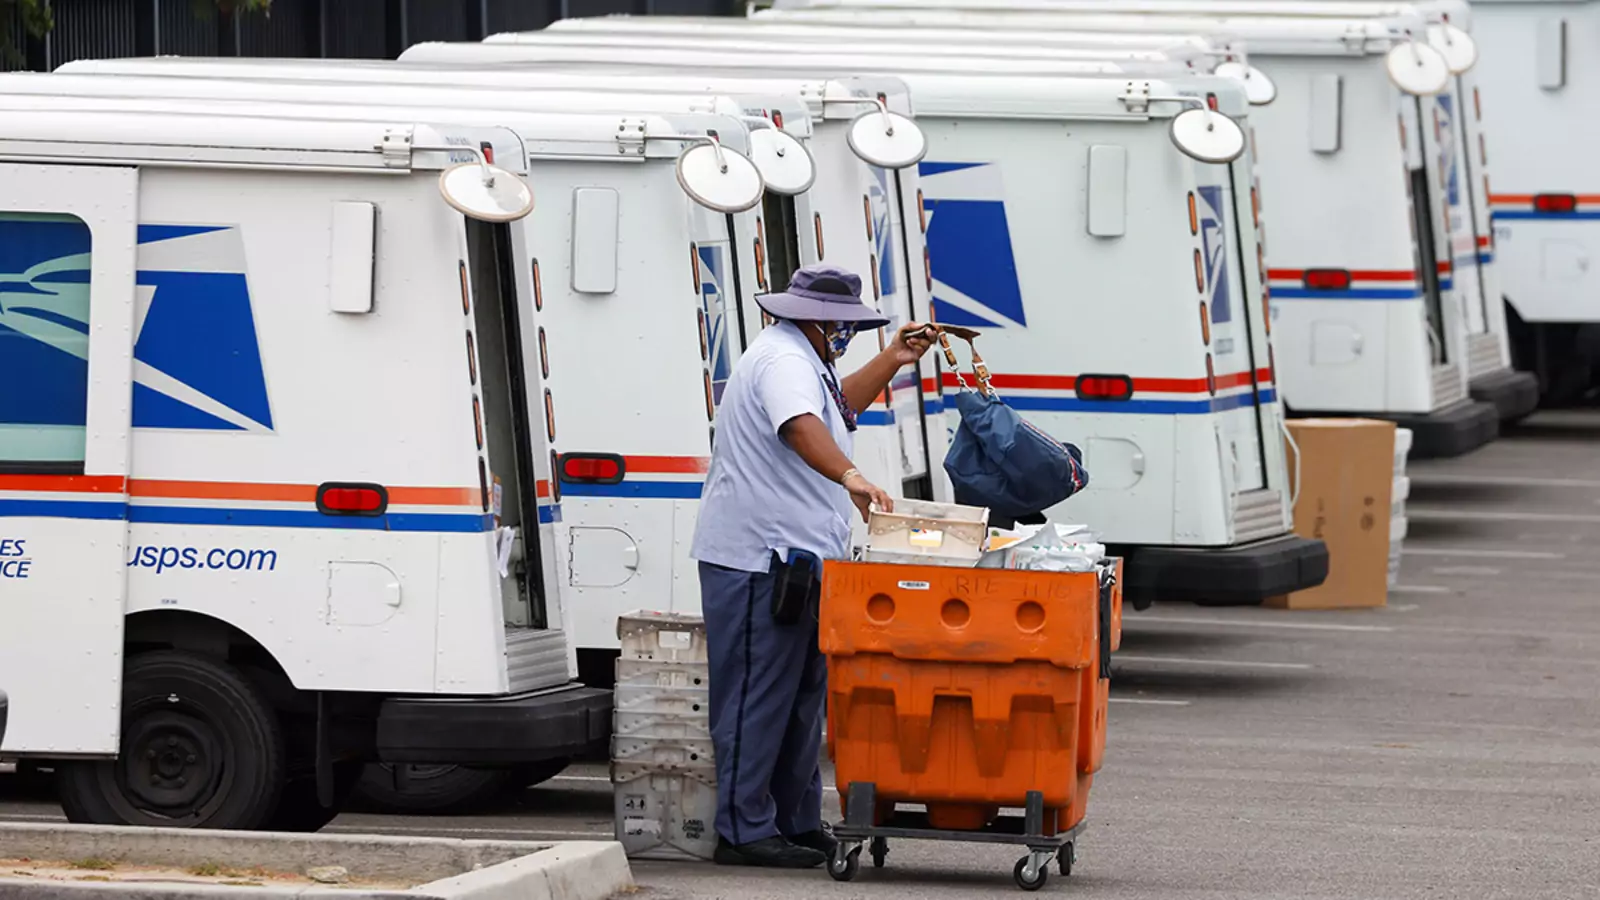 A U.S. postal worker loads his truck as he begins his day during the outbreak of COVID-19 in Carlsbad, California.